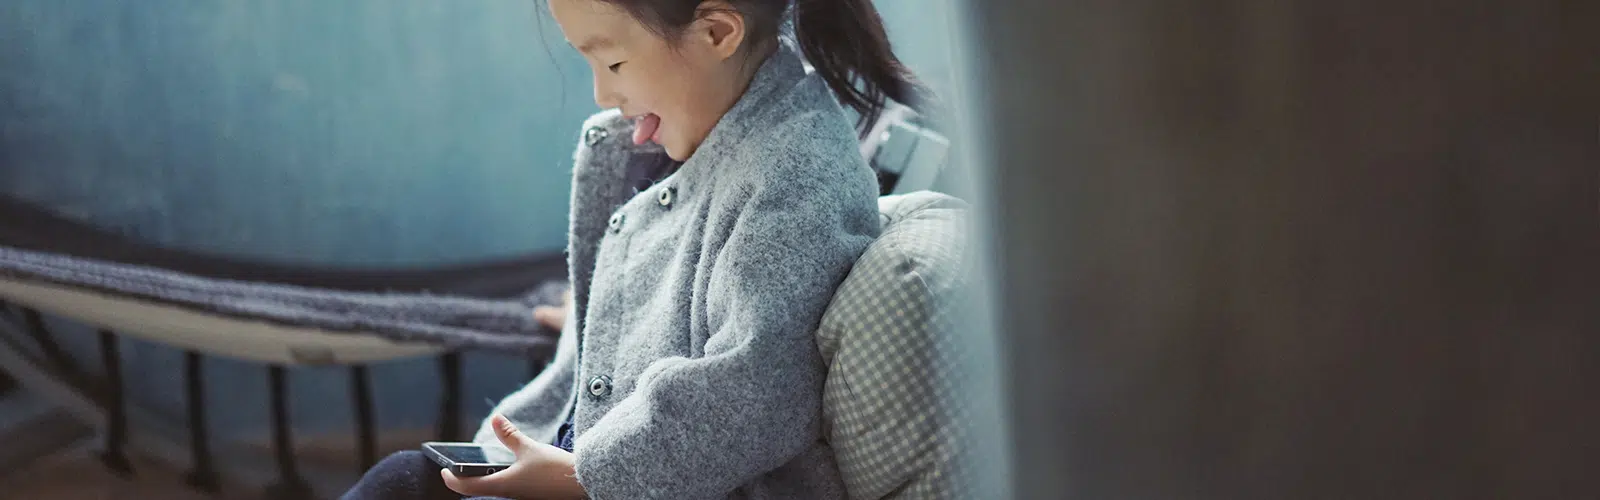 Fun apps for kids: 6 ideas to keep them busy on the road!